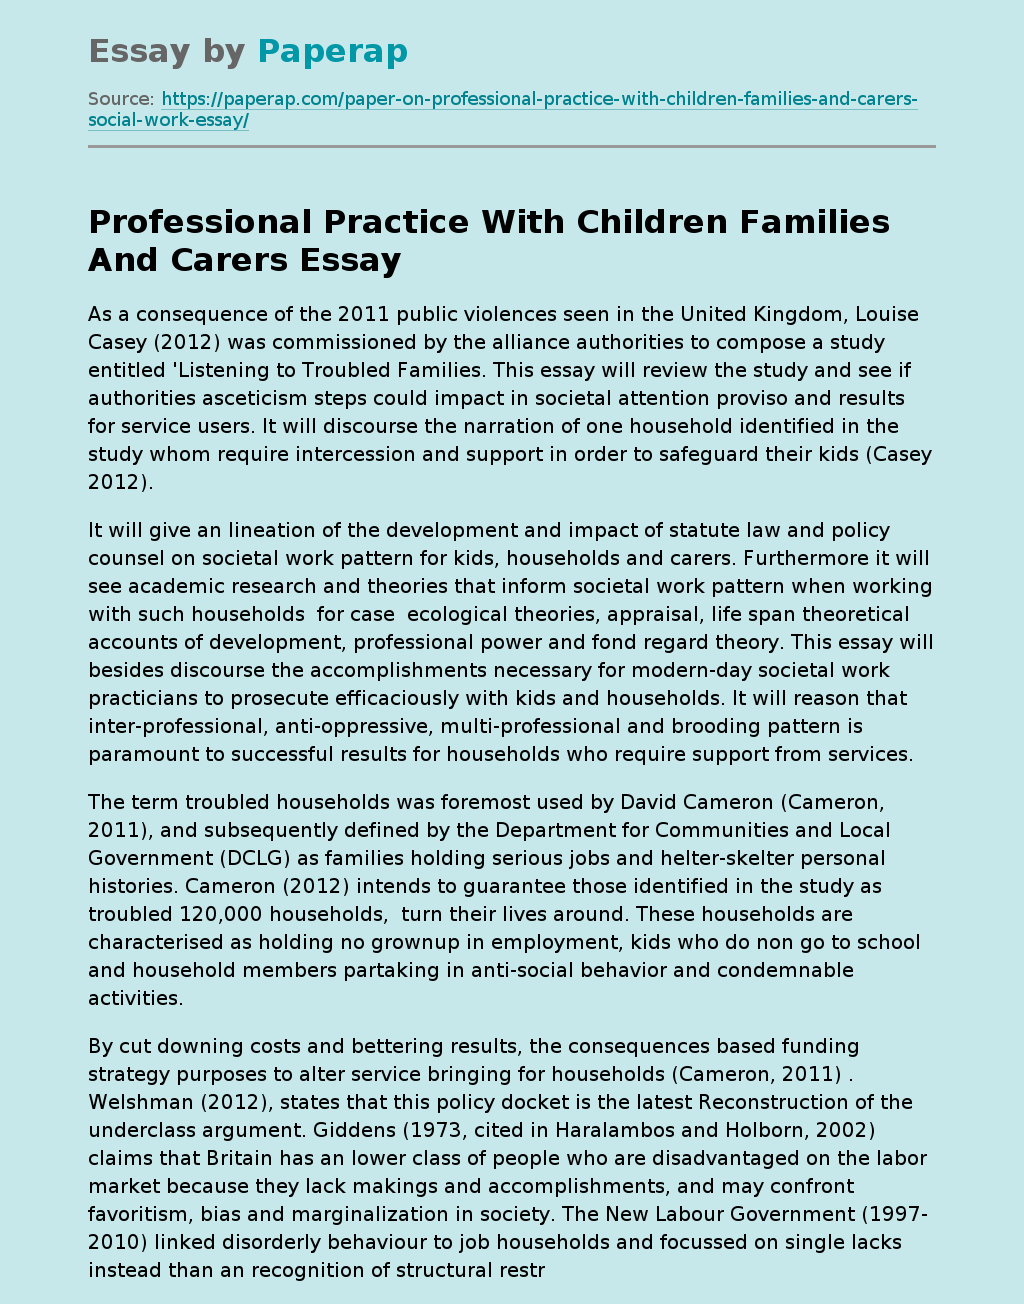 Professional Practice With Children Families And Carers